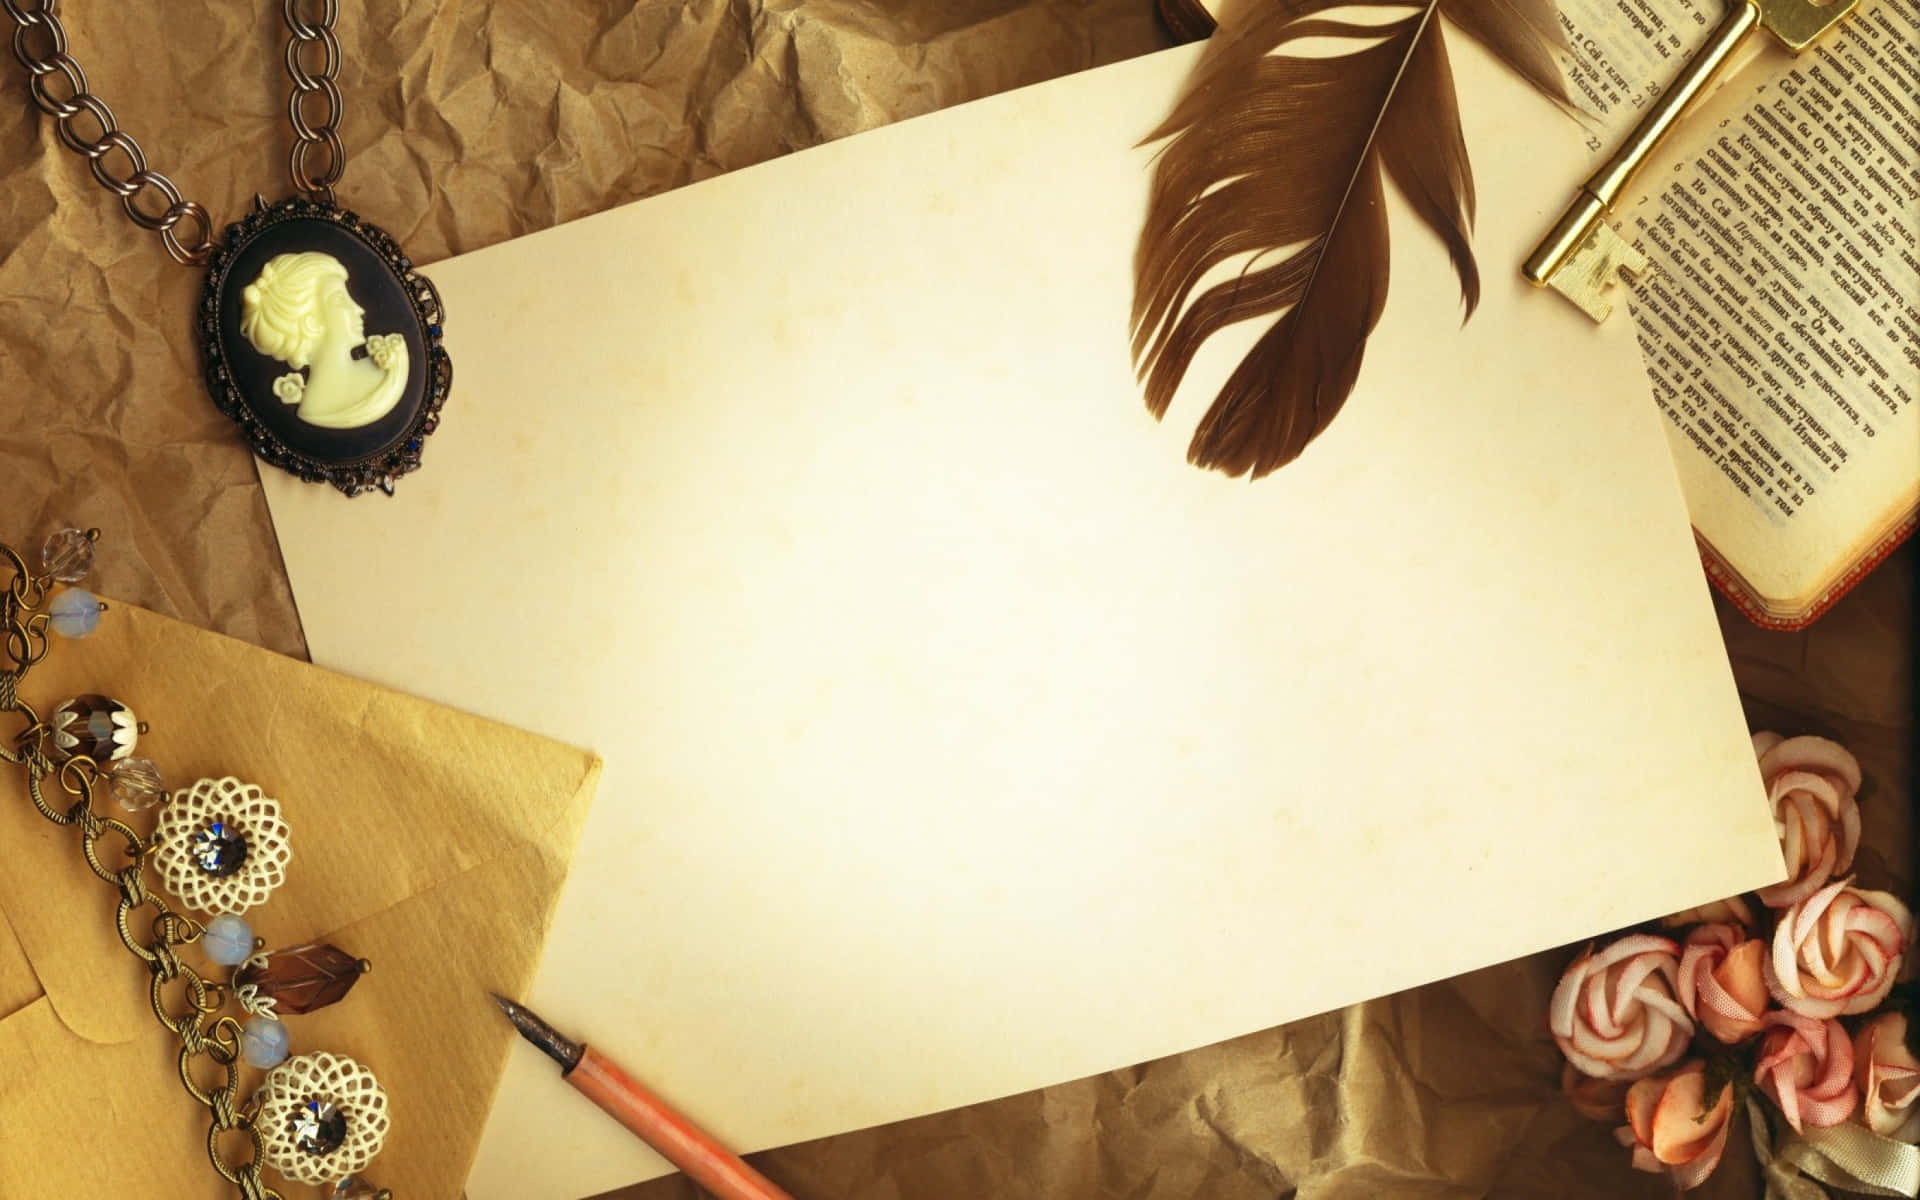 A Vintage Paper, Feather, And Book On A Brown Paper Background